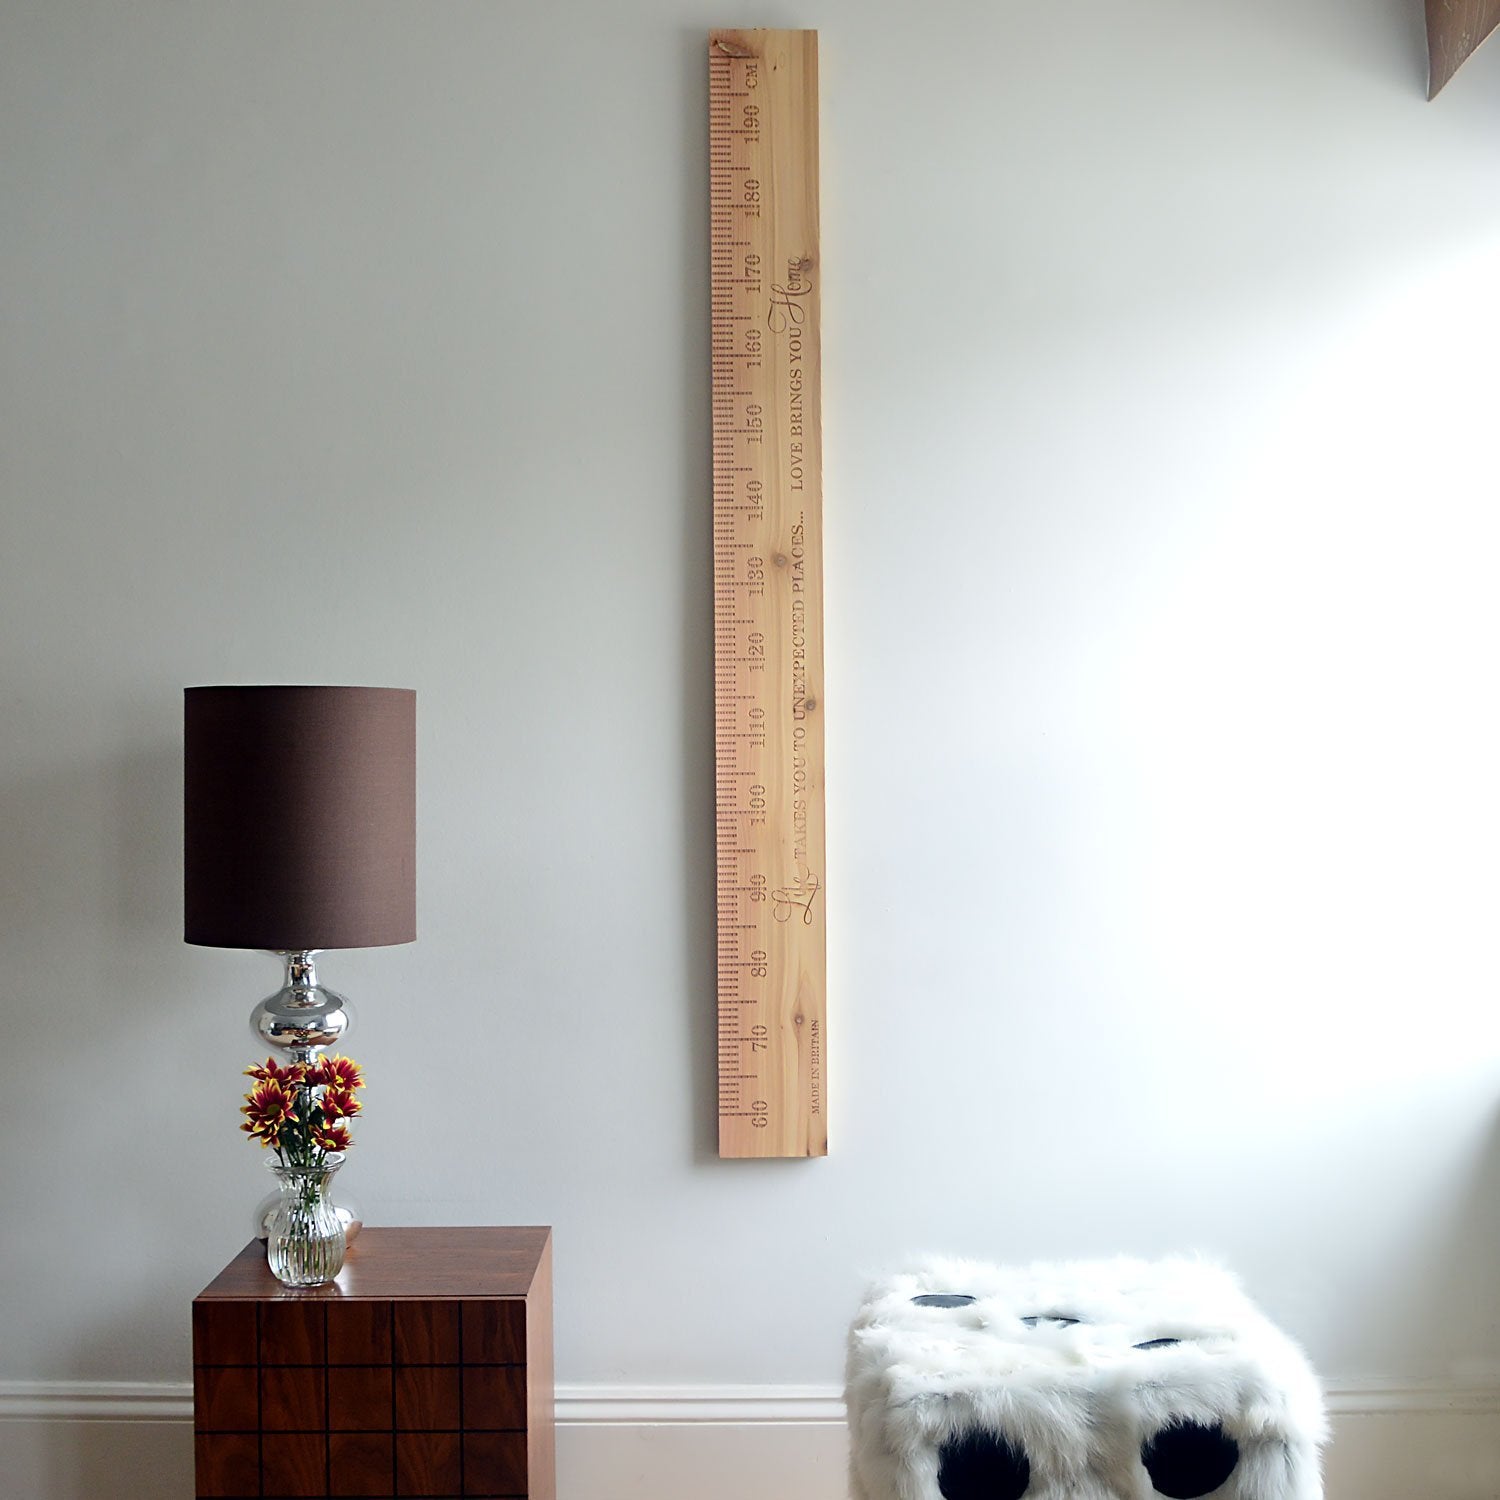 SlimJim Dual Measure Wooden Ruler Height Chart (Non-Personalised) - Wildash London